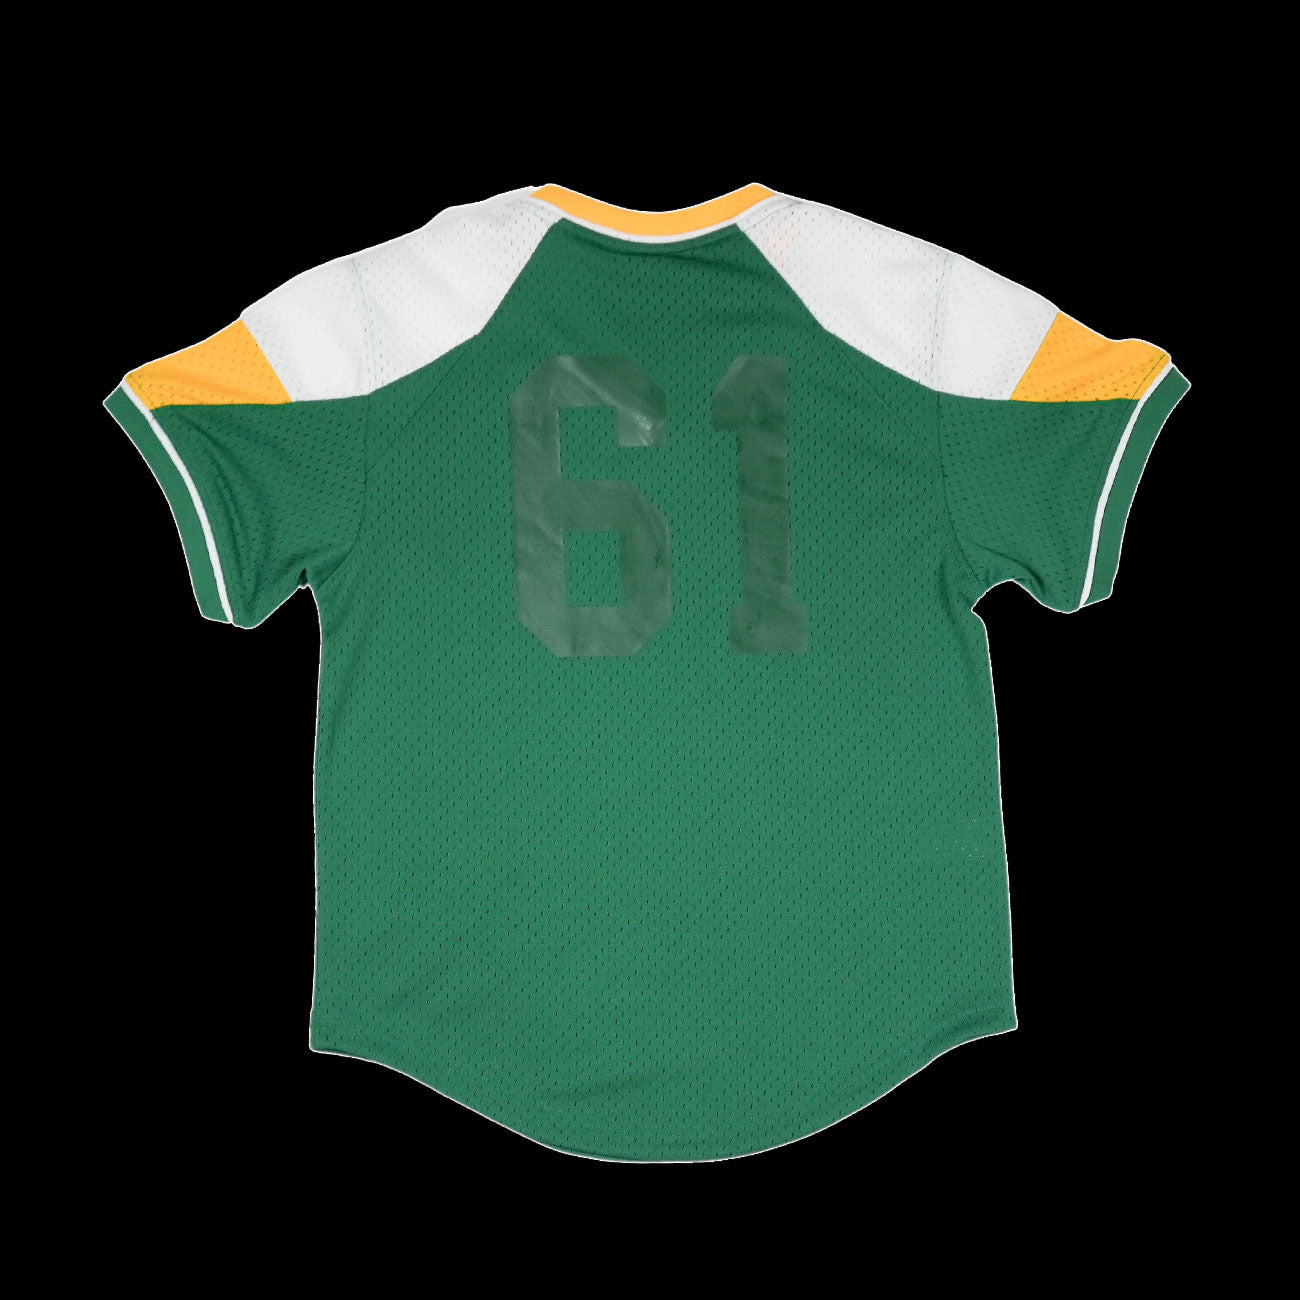 Mitchell & Ness x Fred Segal Sunset BP Jersey (Green/White)